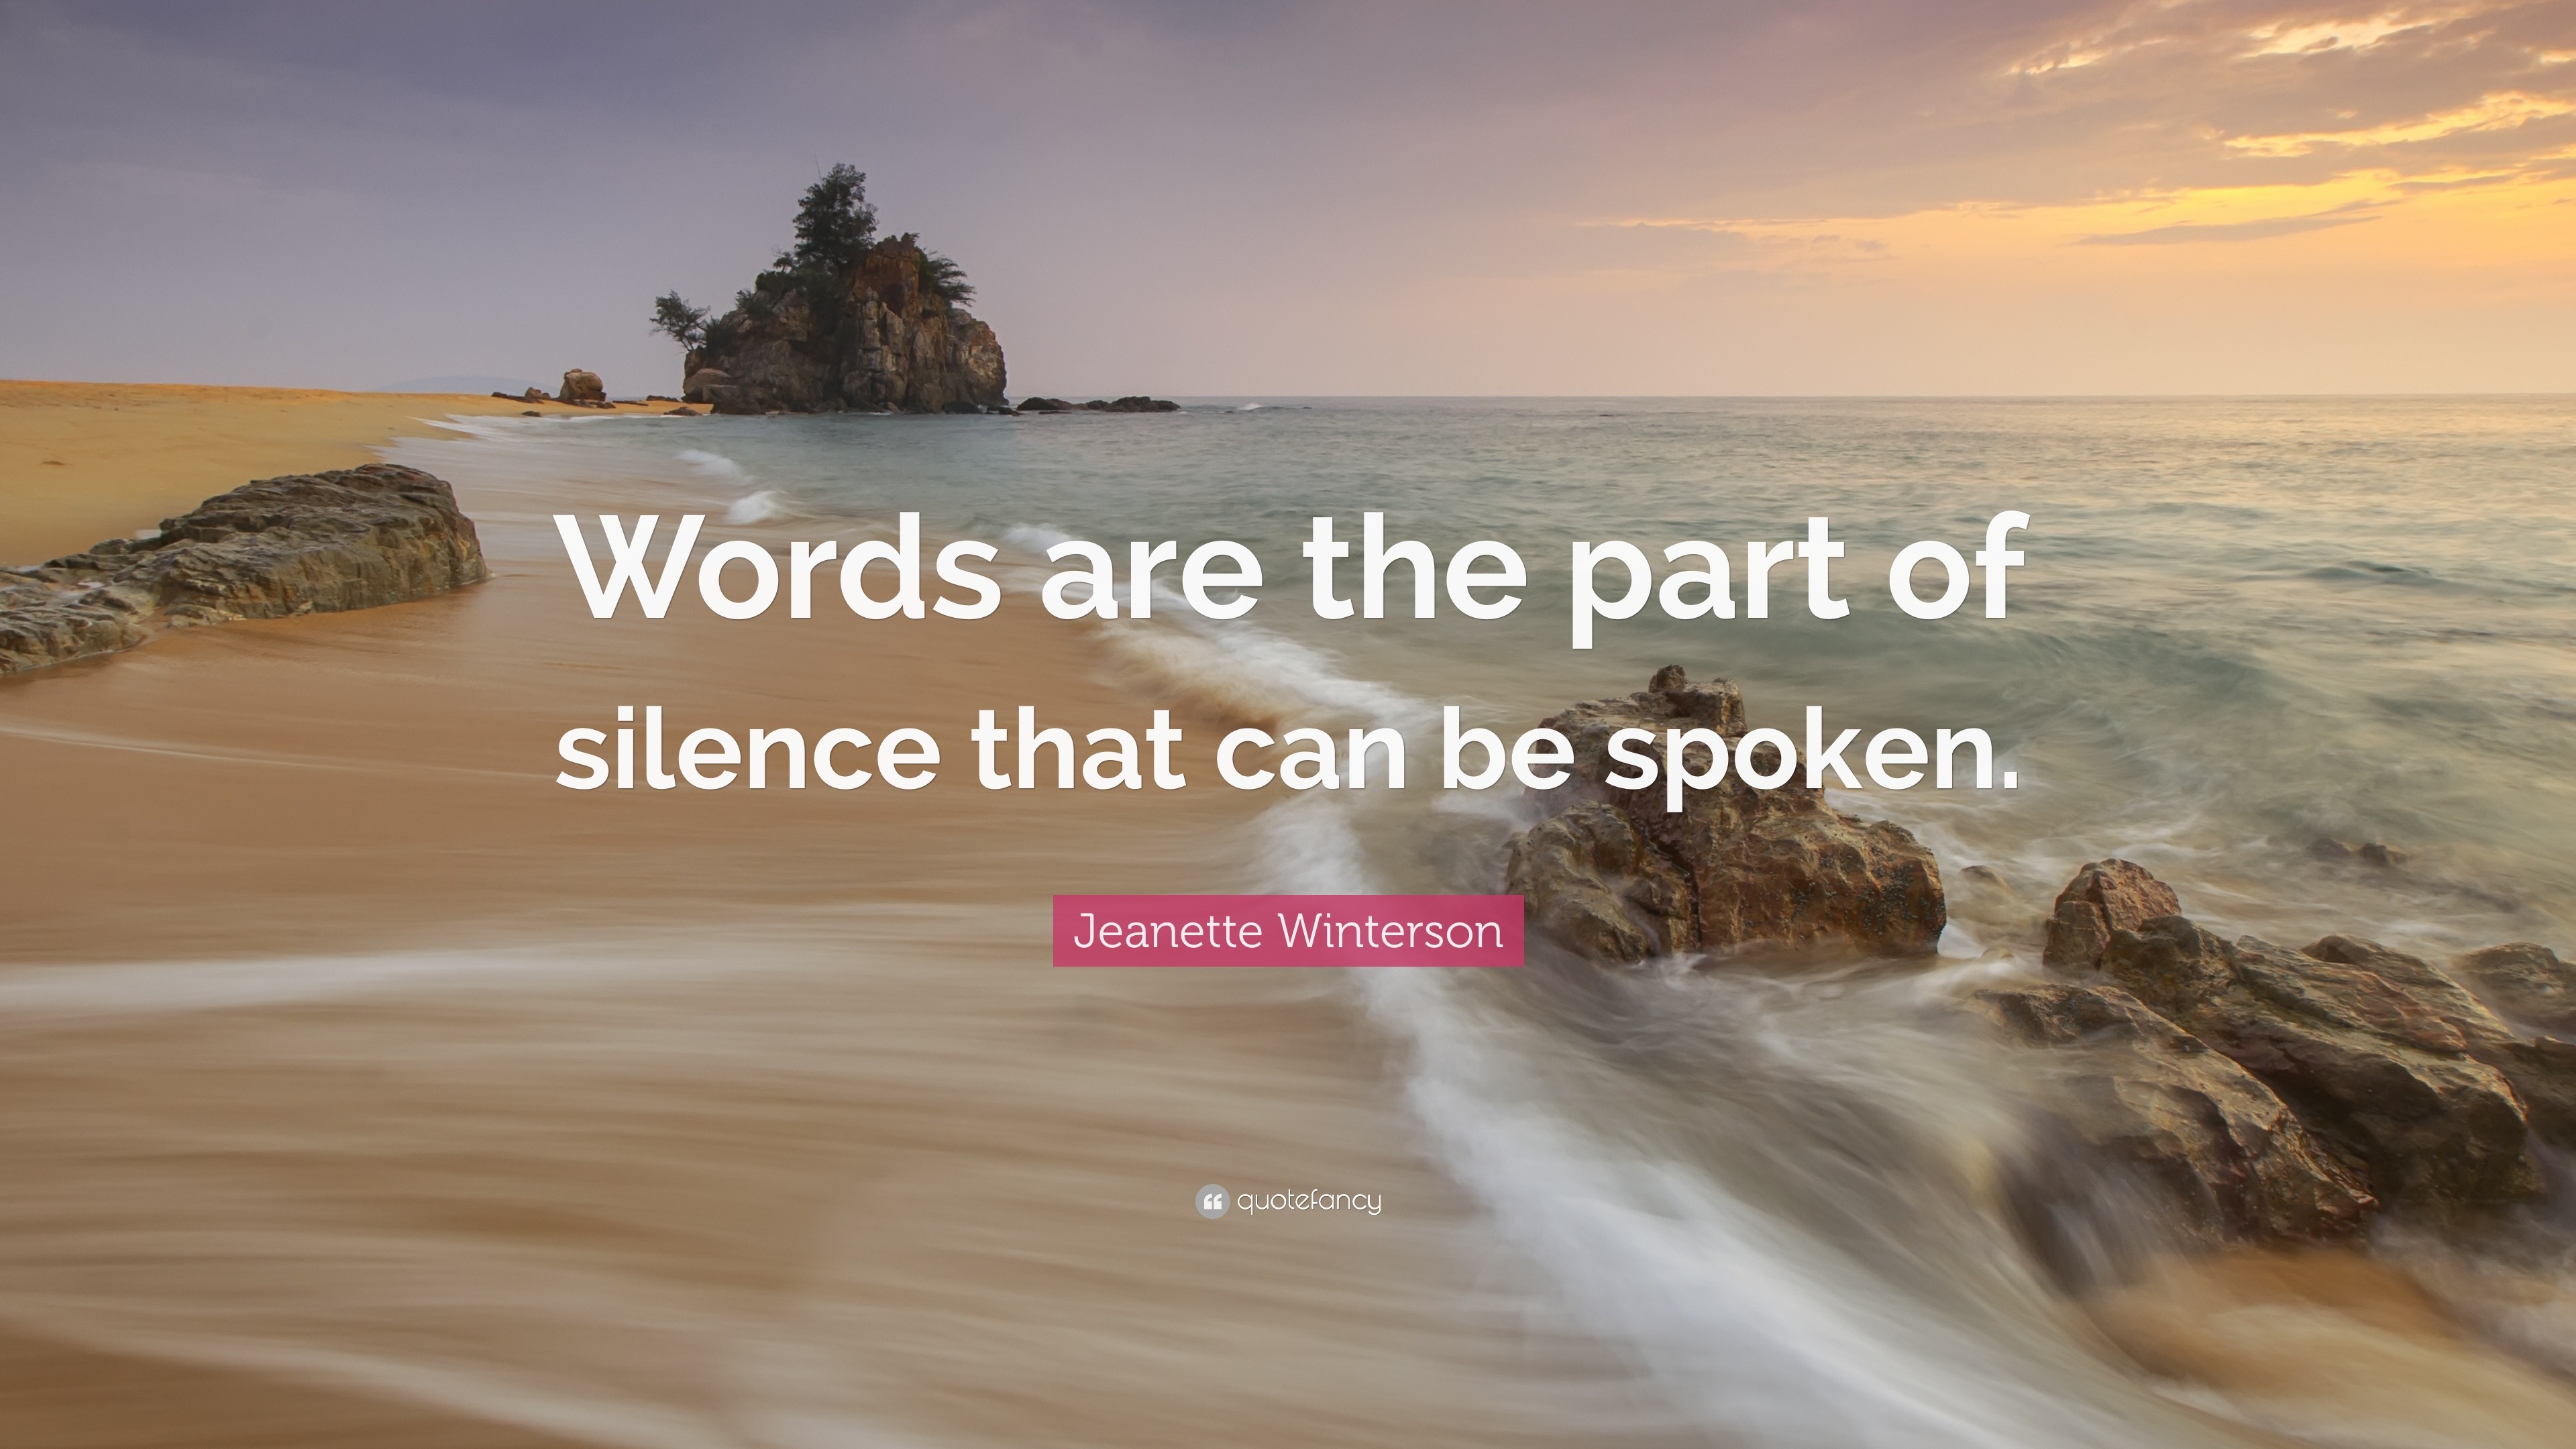 Jeanette Winterson Quote: “Words are the part of silence that can be ...